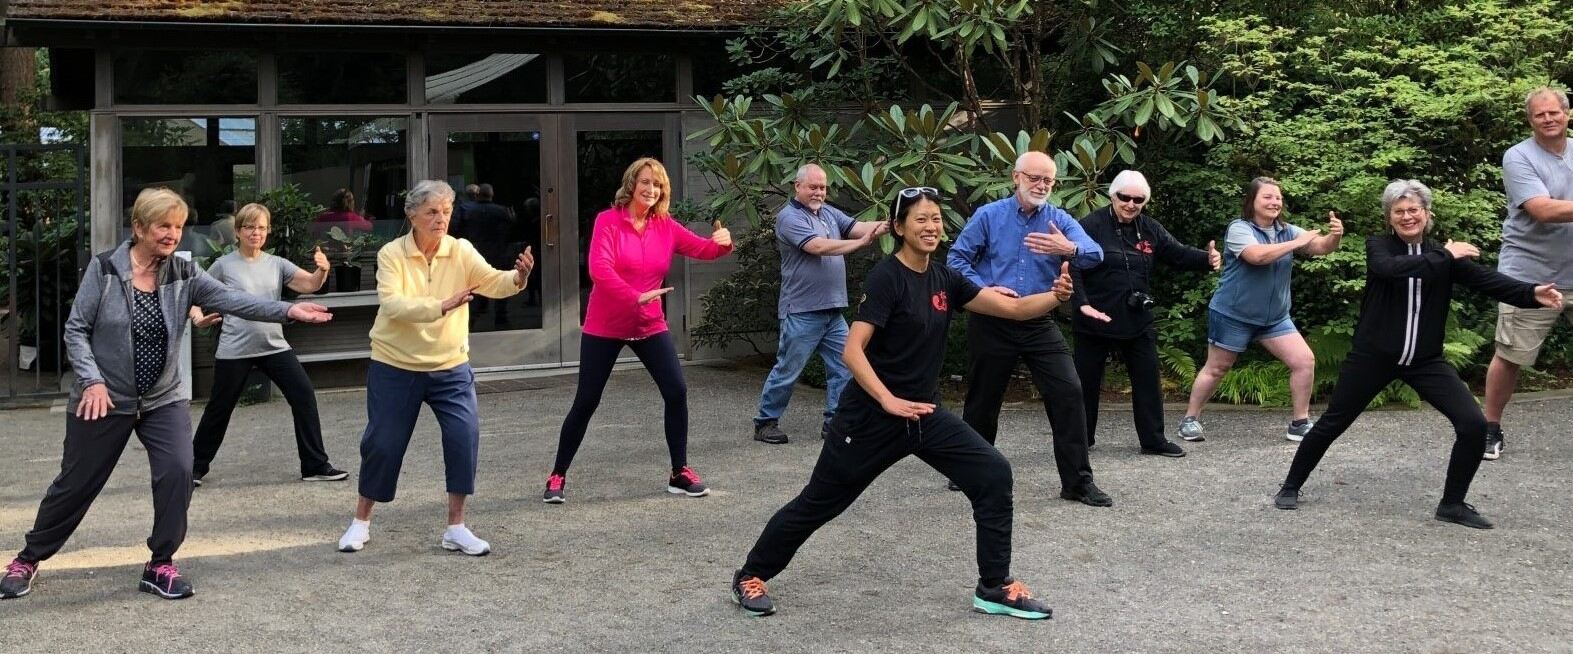 11-facts-about-tai-chi-day